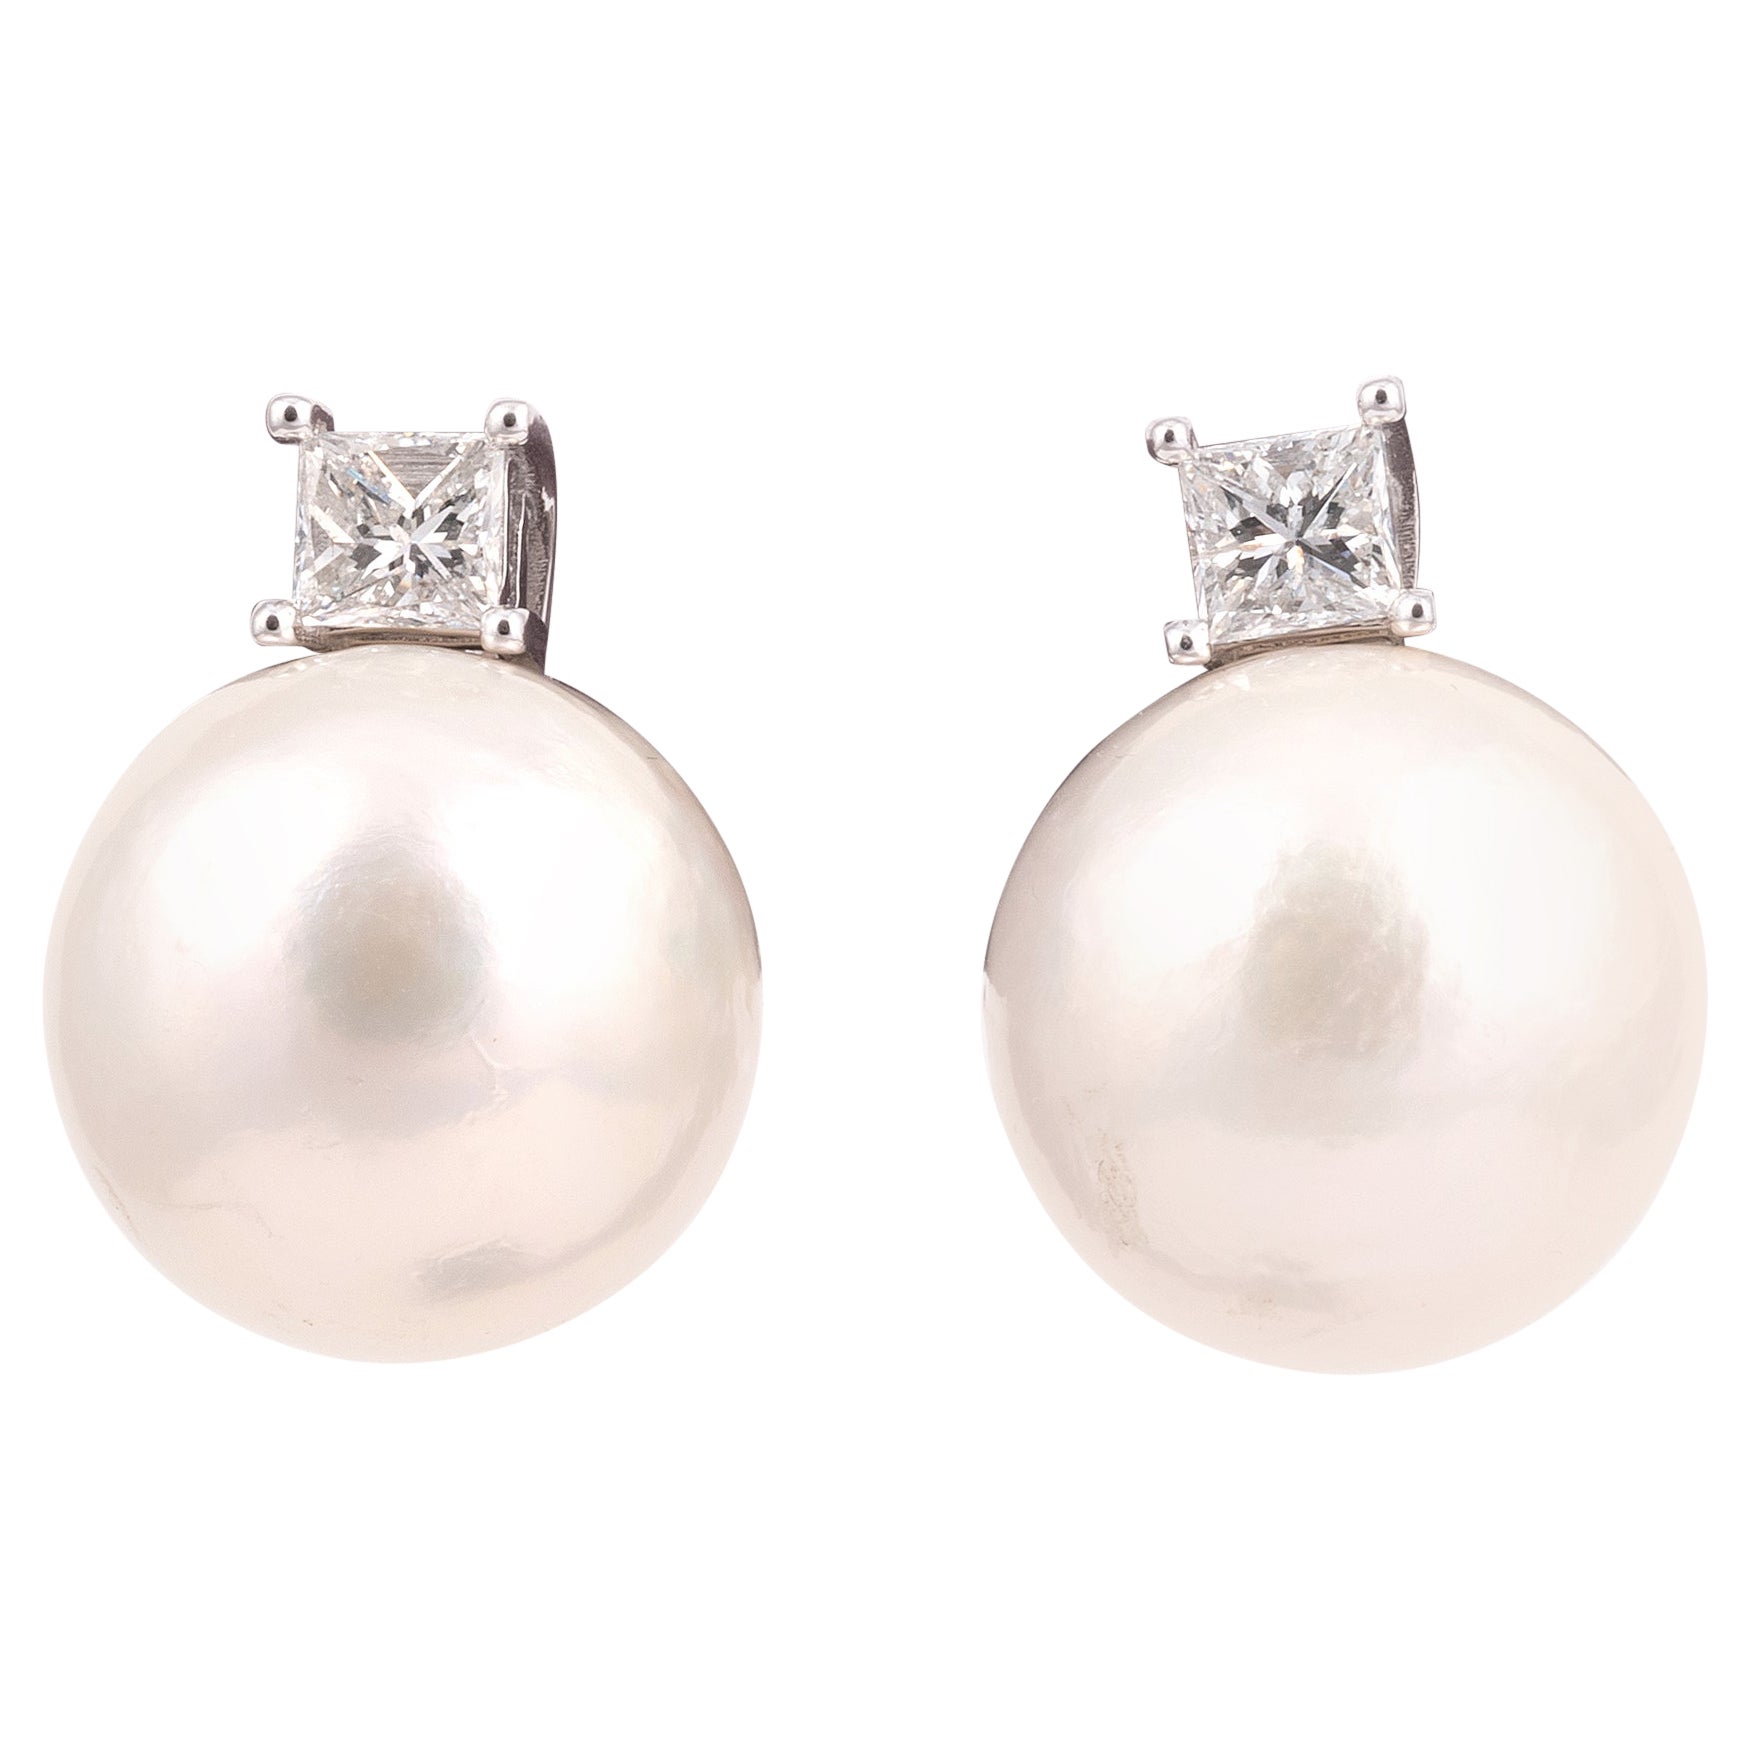 Pair of South Sea Cultured Pearl and Diamond Earrings For Sale